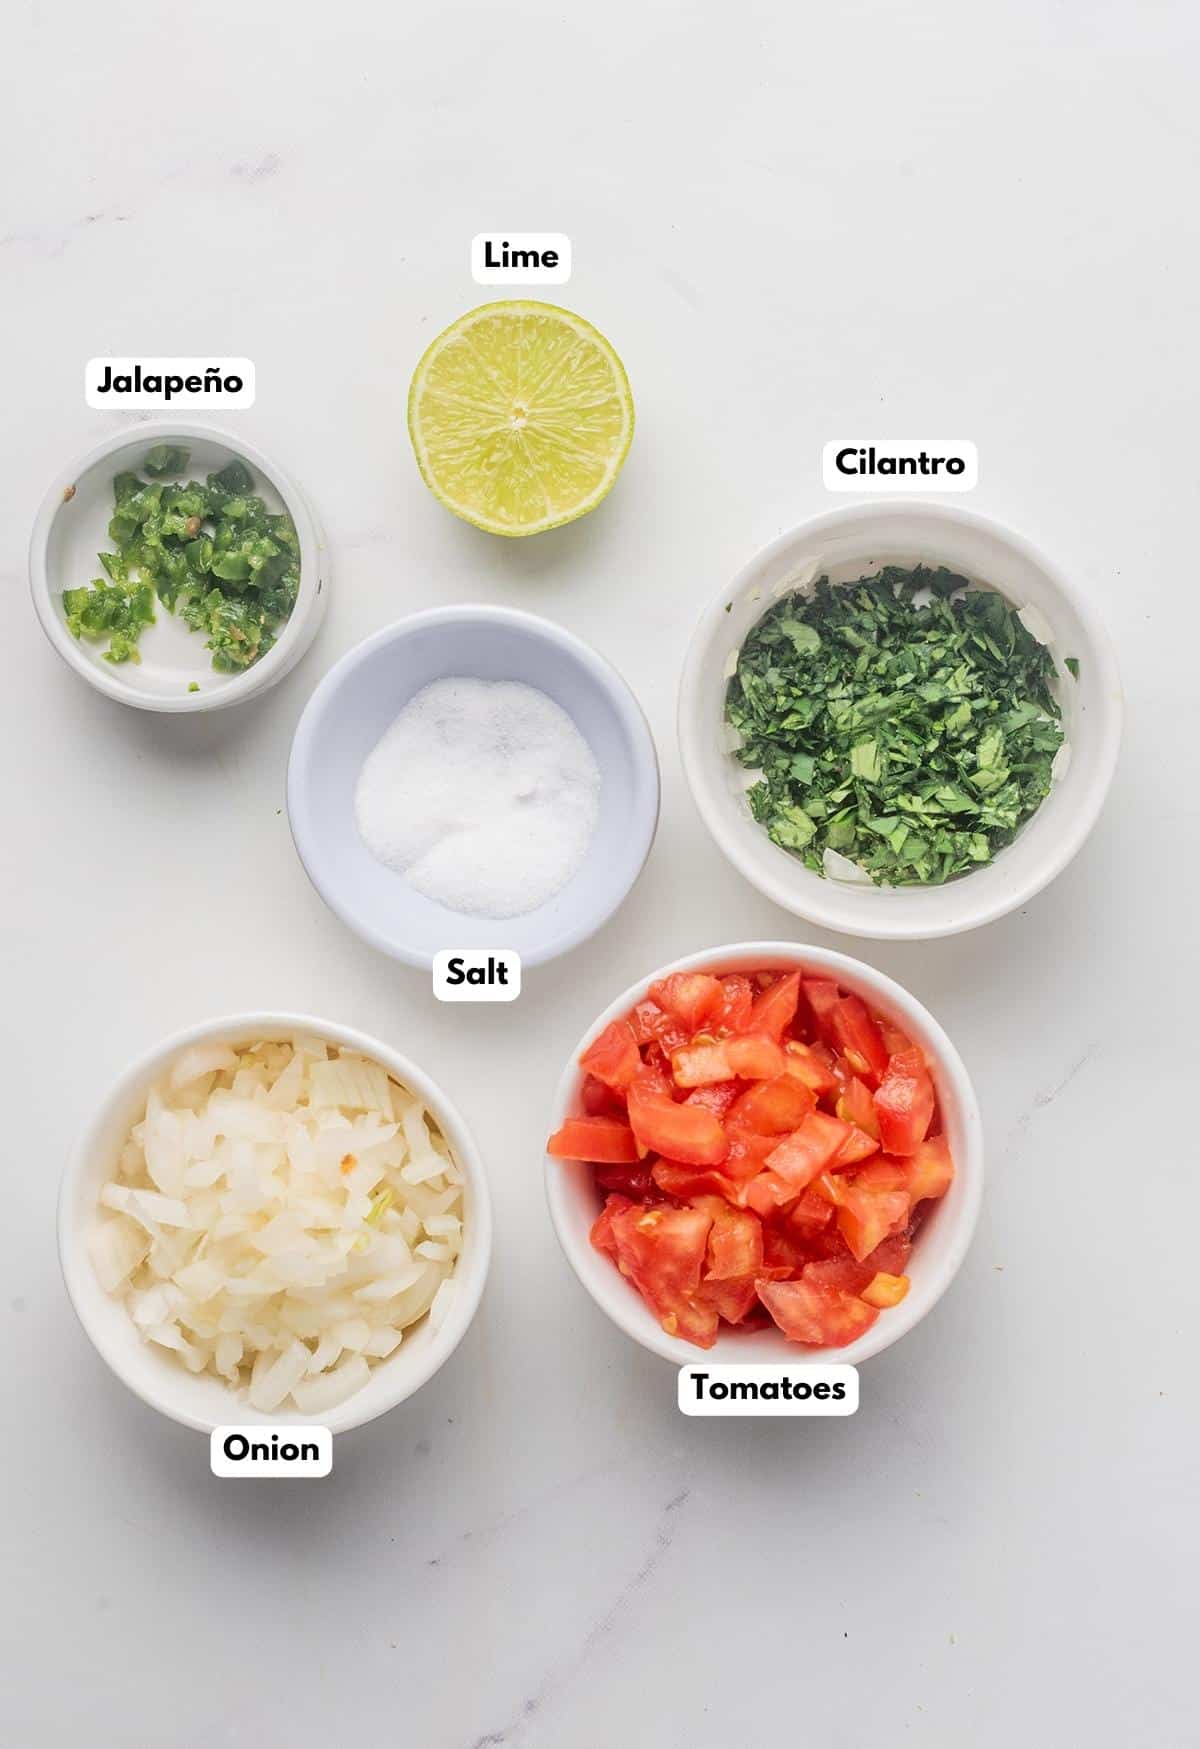 The ingredients needed to make the pico de gallo.